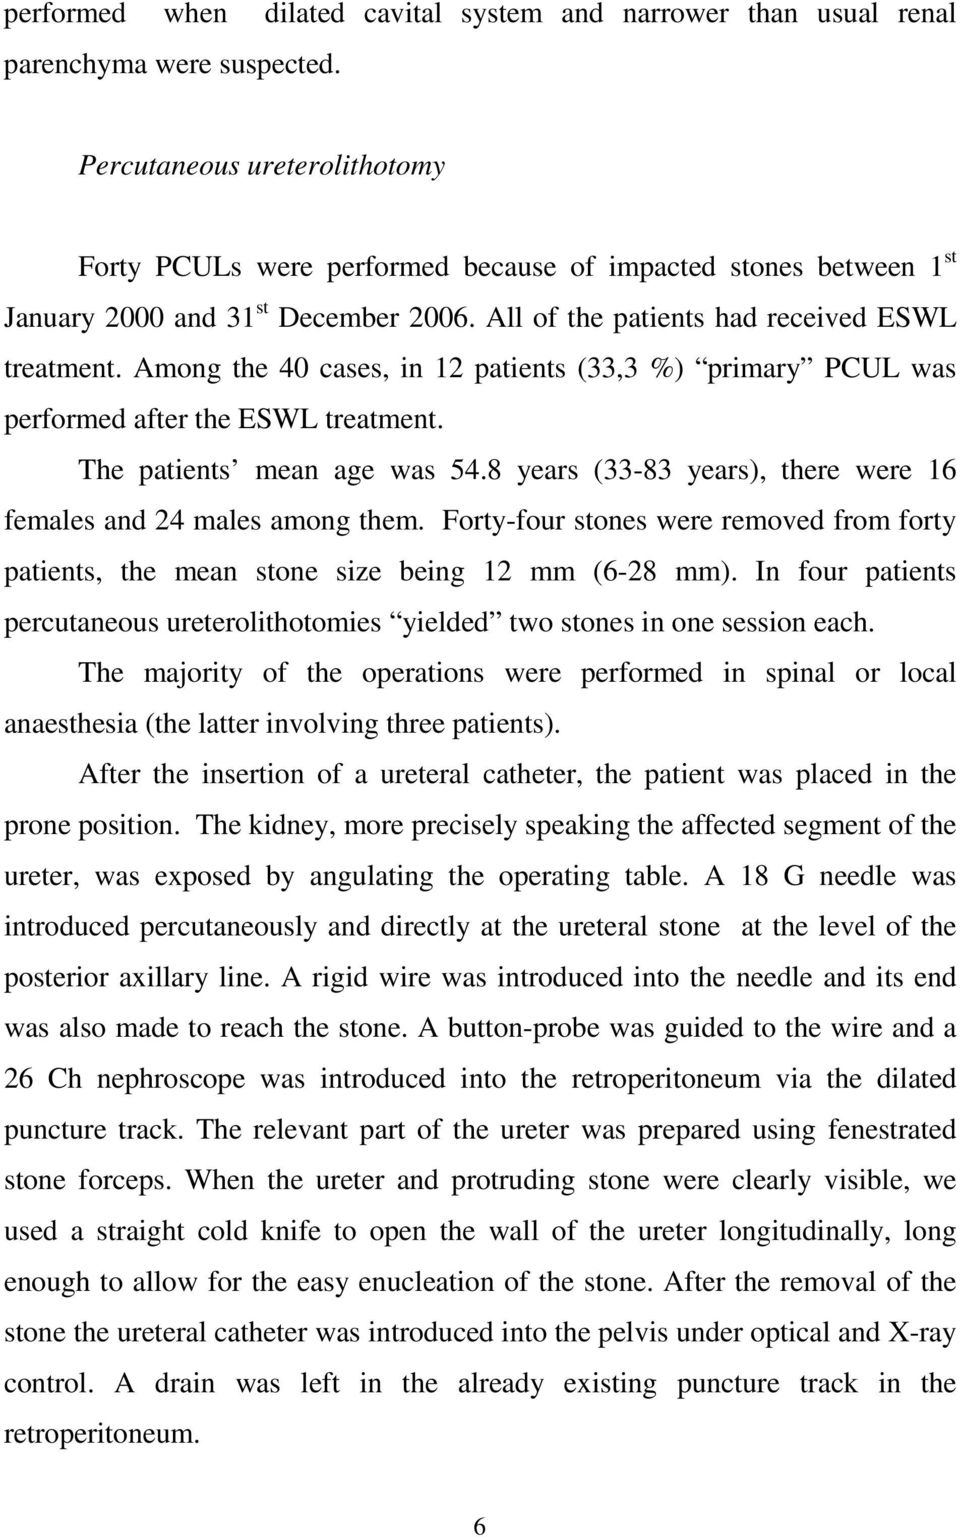 Among the 40 cases, in 12 patients (33,3 %) primary PCUL was performed after the ESWL treatment. The patients mean age was 54.8 years (33-83 years), there were 16 females and 24 males among them.